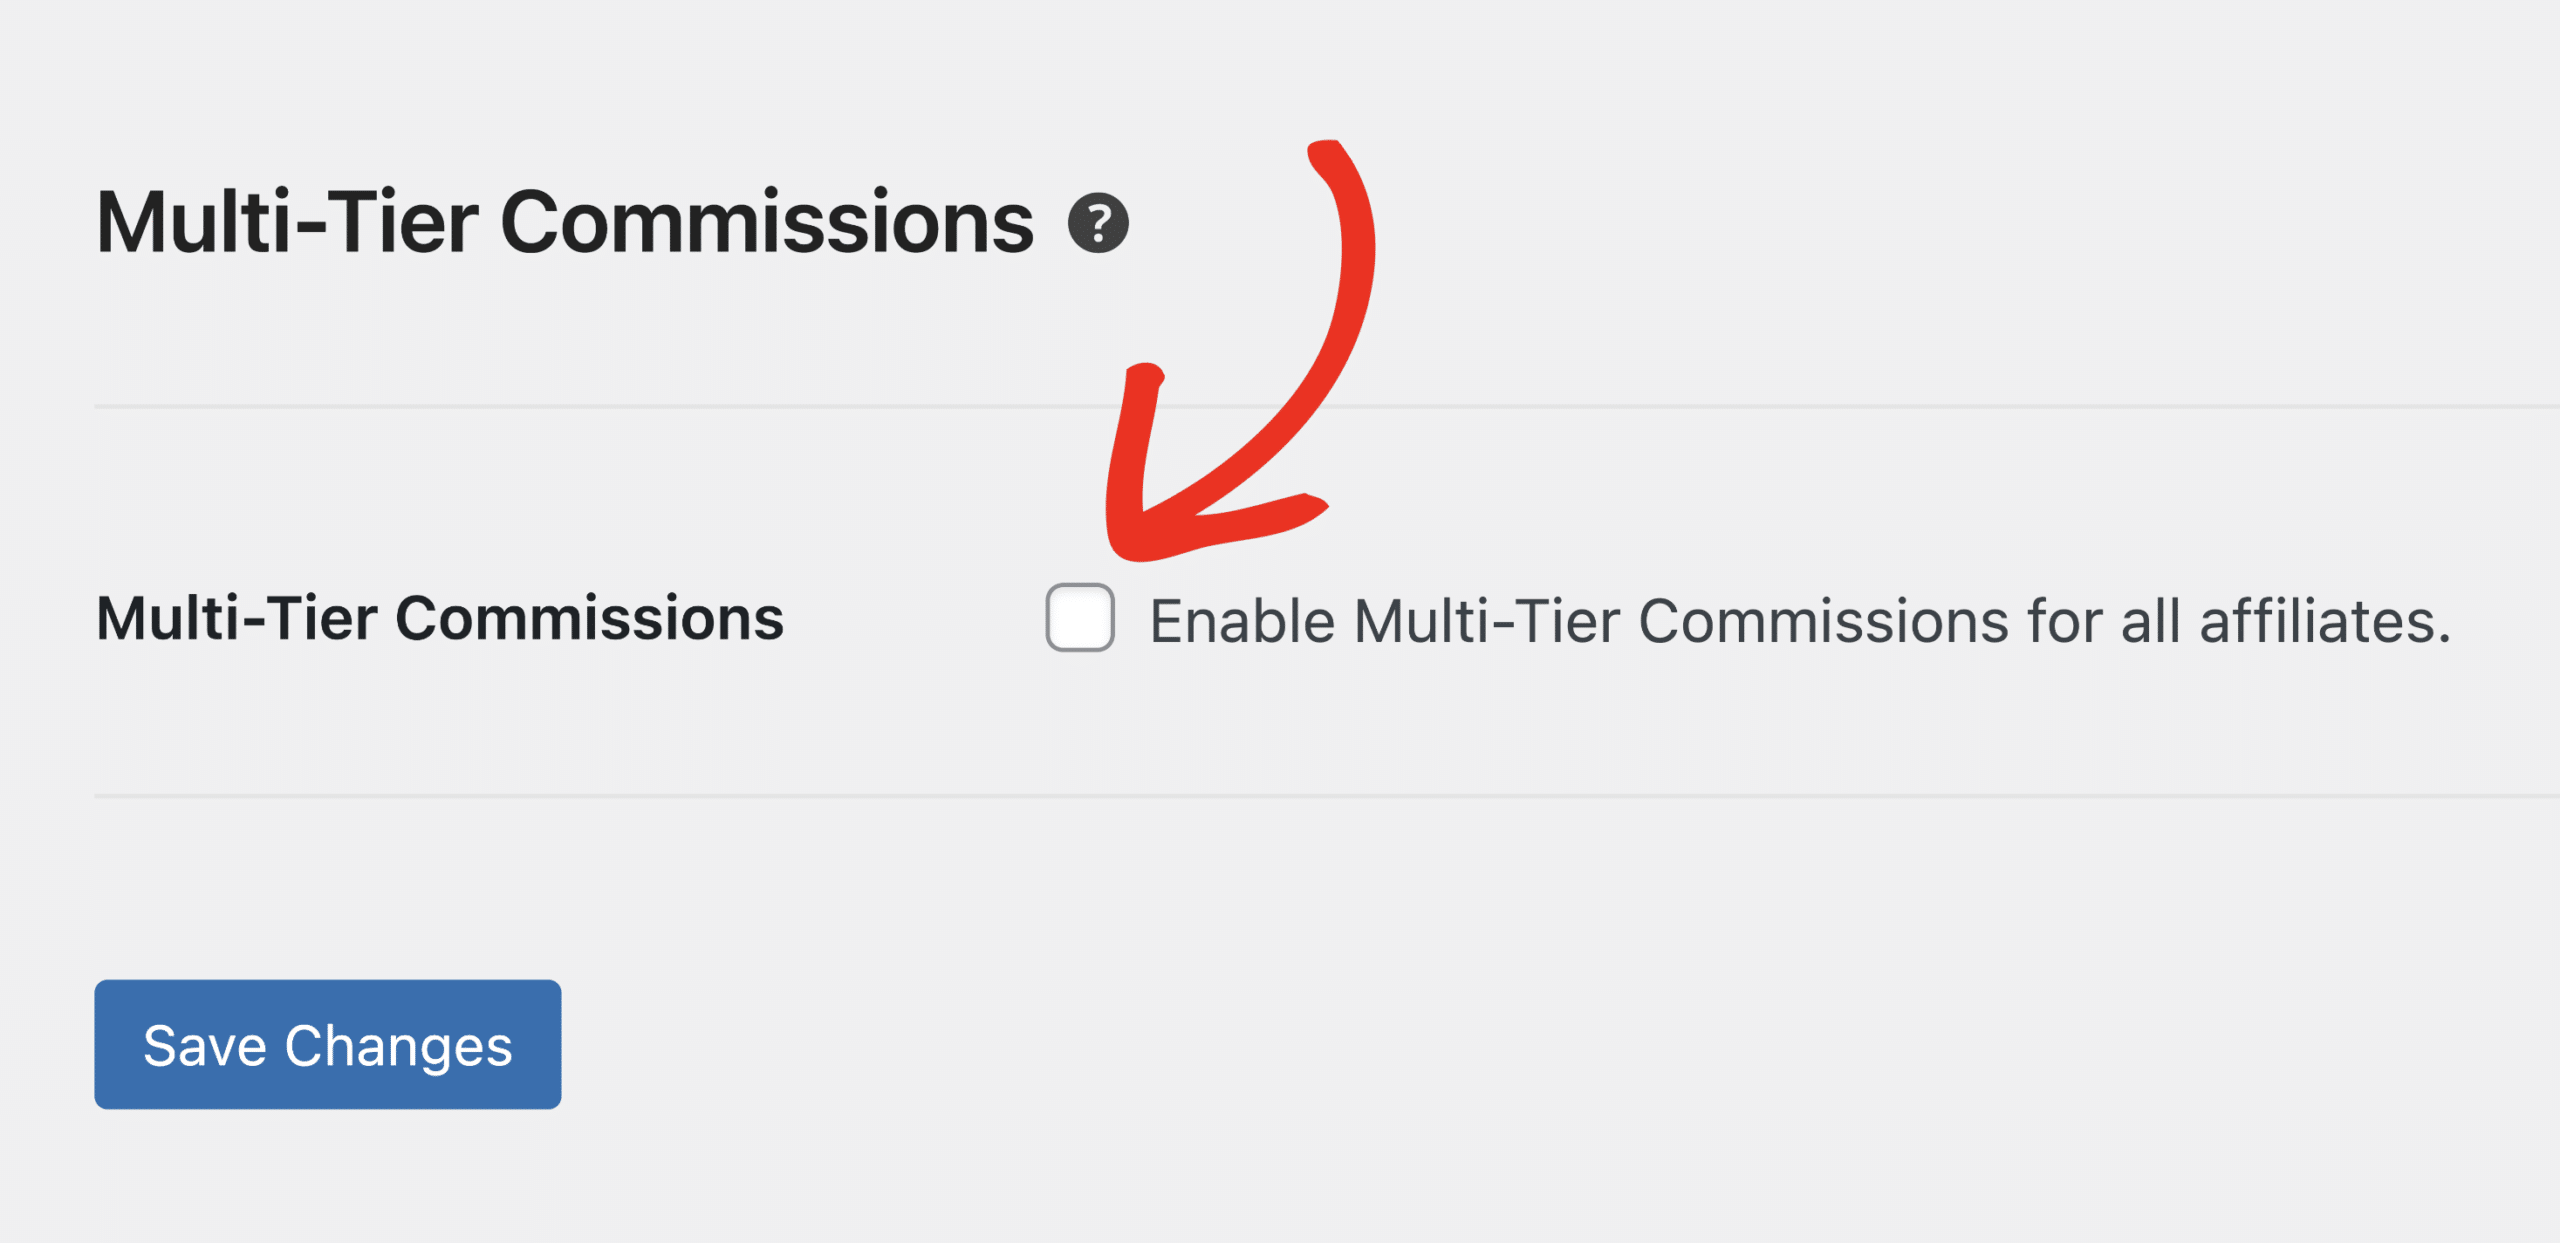 Tick the Enable Multi-Tier Commissions for all affiliates box